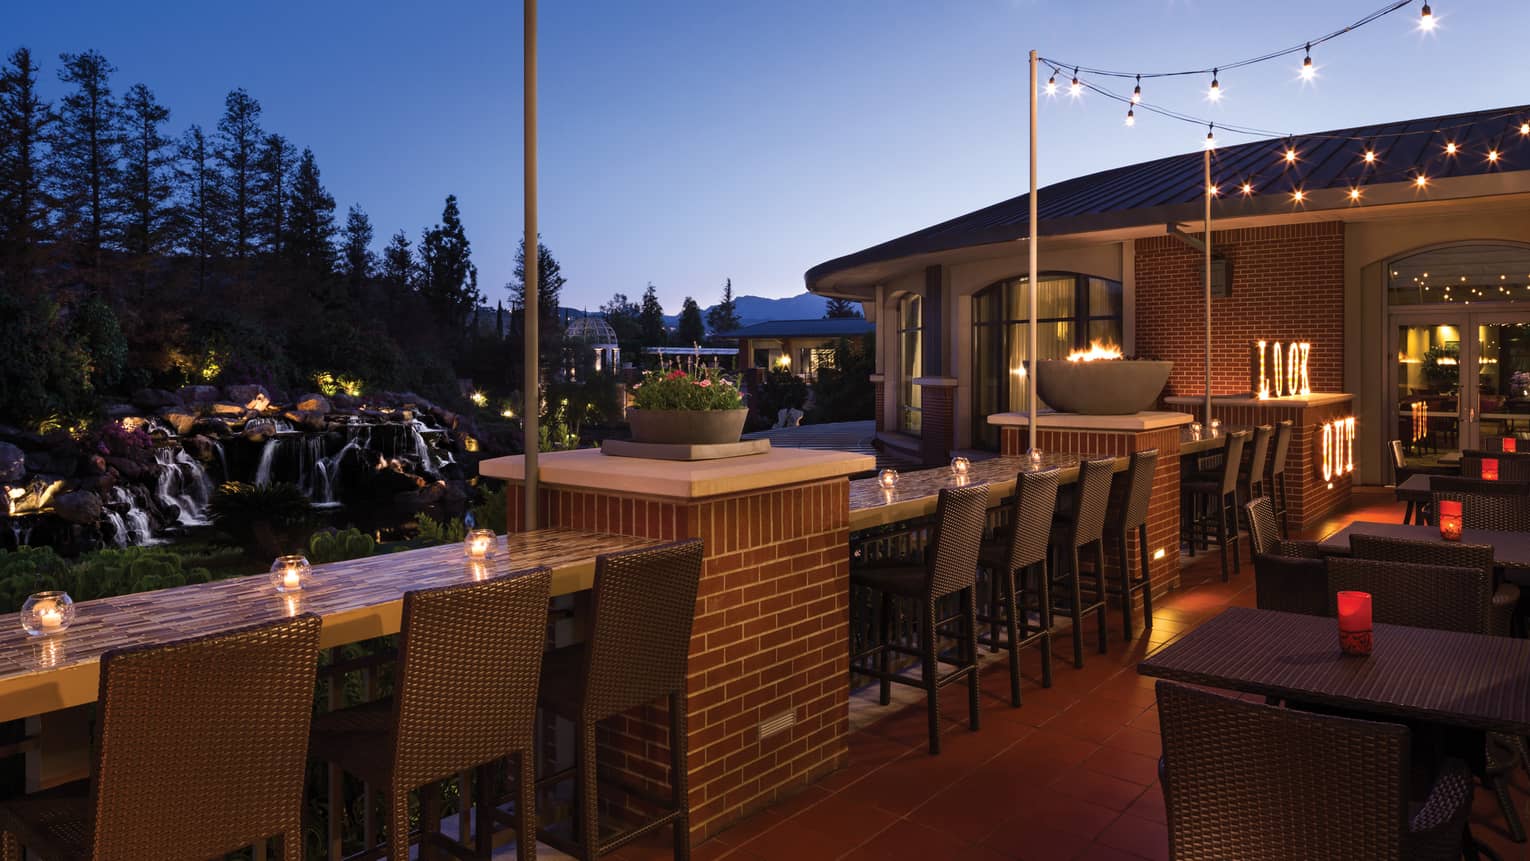 Candle-lit bar, stools along Lookout patio, string of lights, outdoor patio, waterfall views